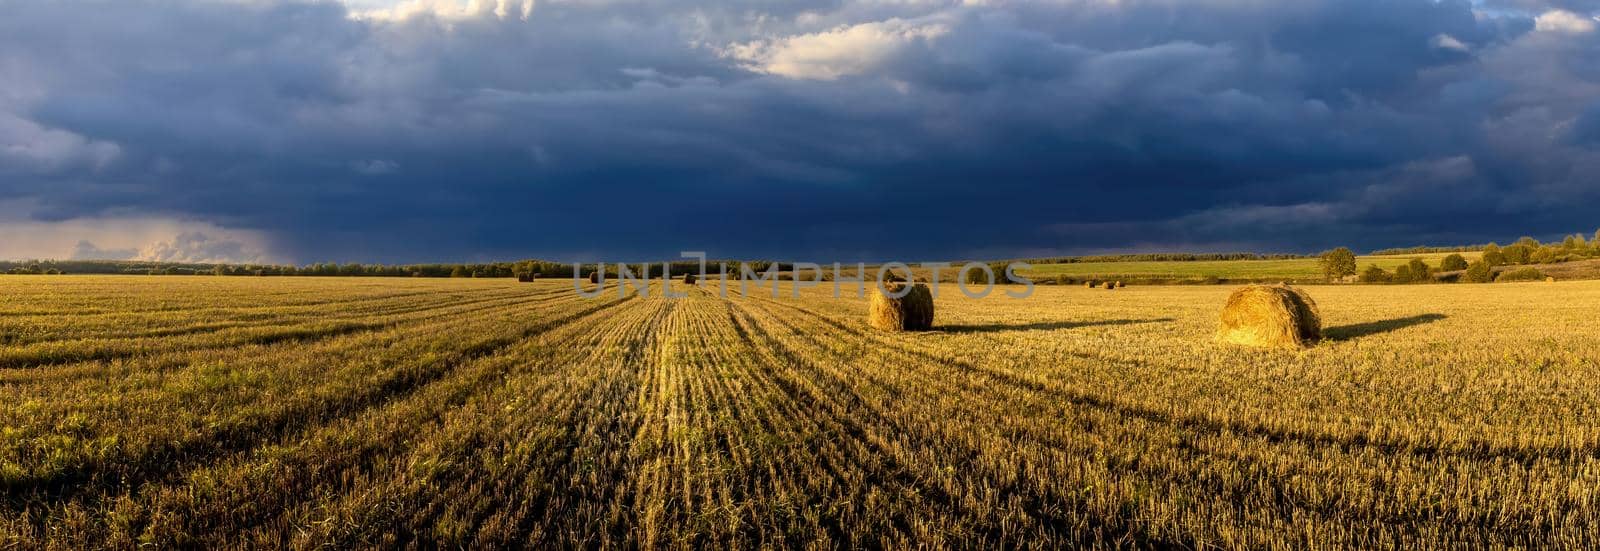 A field of golden haystacks on an autumn day, illuminated by sunlight, with rain clouds in the sky.